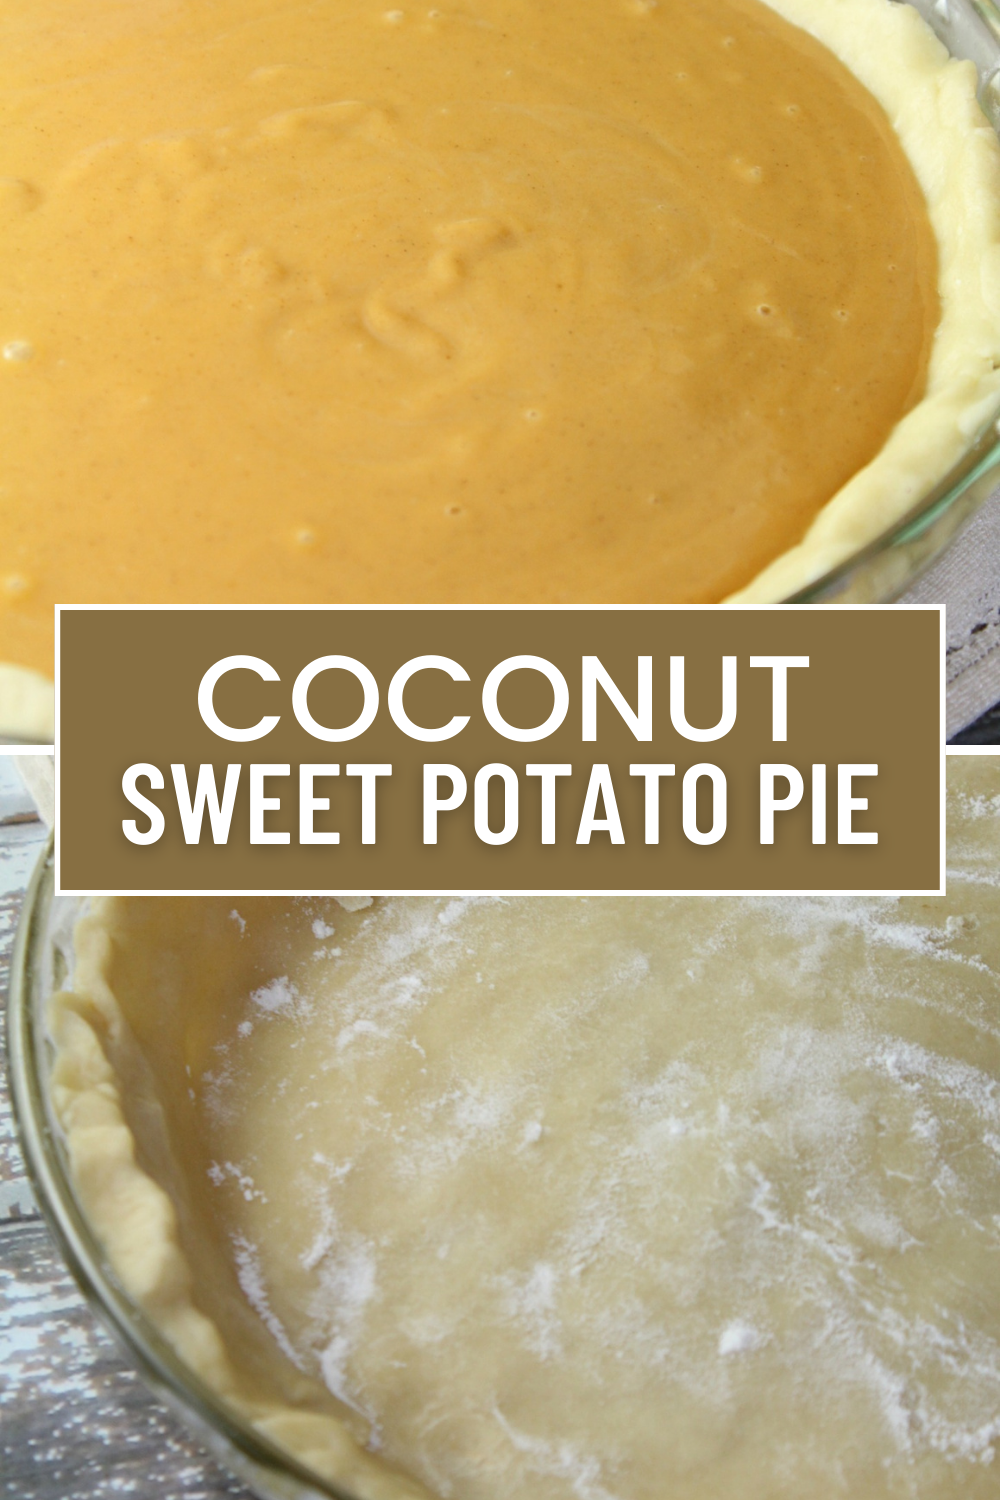 This Coconut Sweet Potato Pie merries together the beautiful flavors of sweet potatoes with coconut milk in a pie that's perfect for the holiday table!